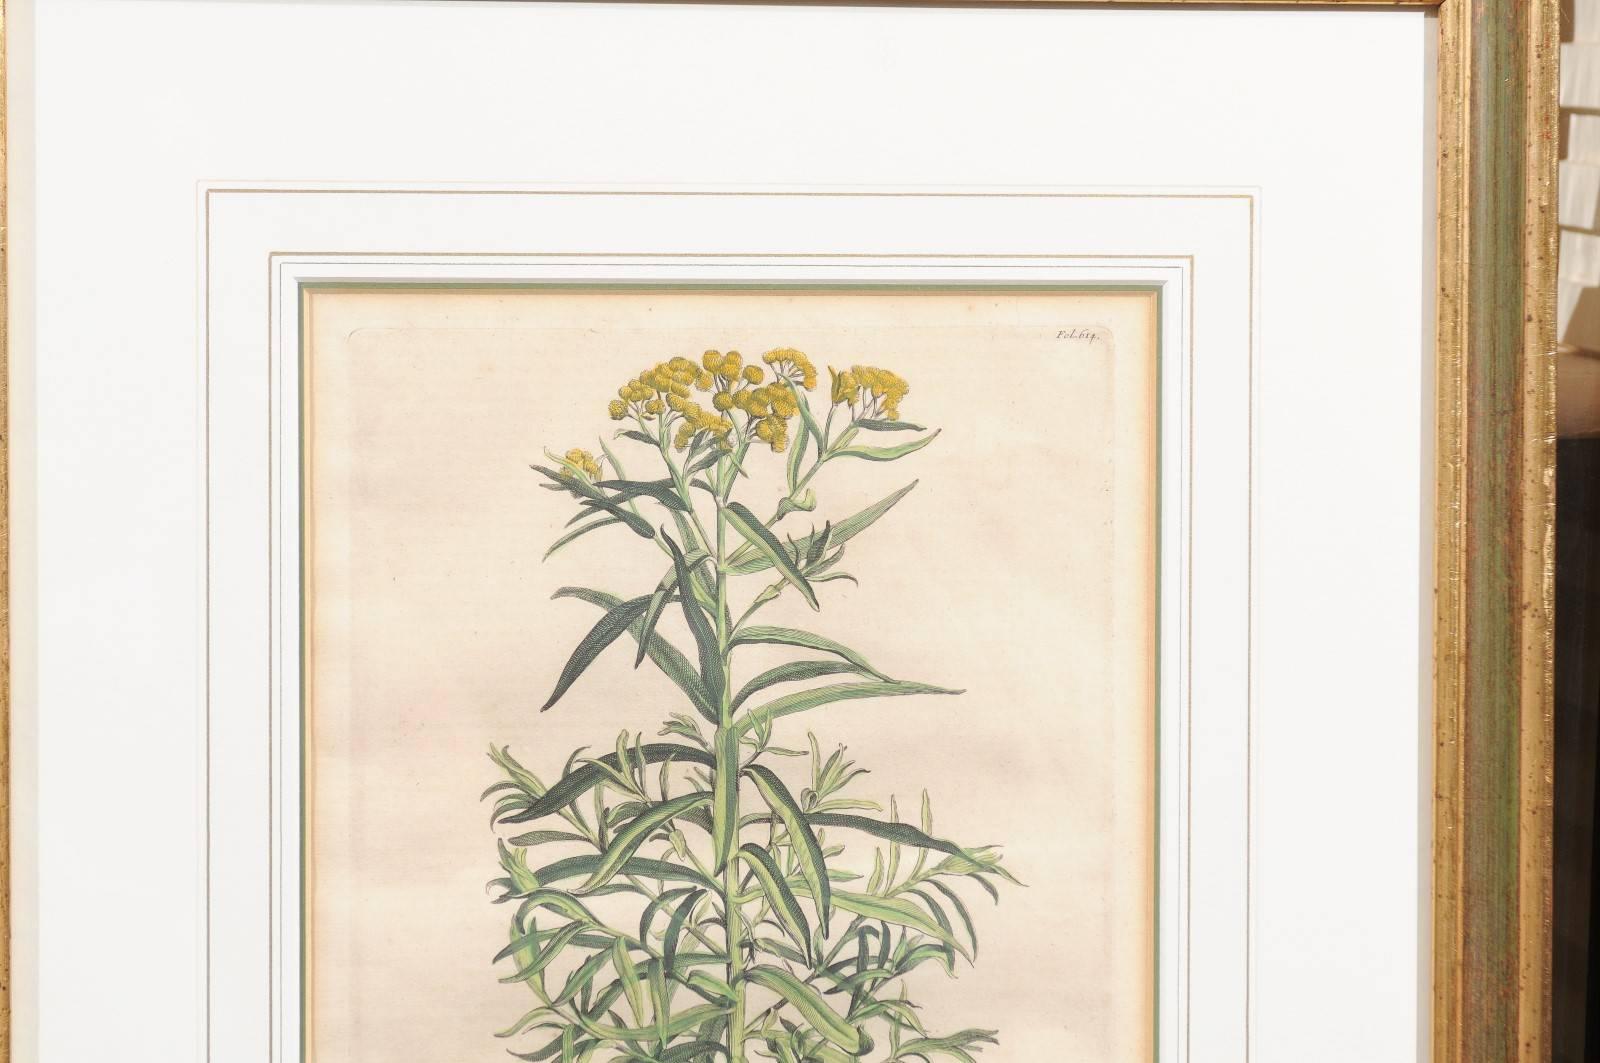 Paper Pair of Gilt Framed Botanical Prints, Dutch, circa 1696 with Later Hand Coloring